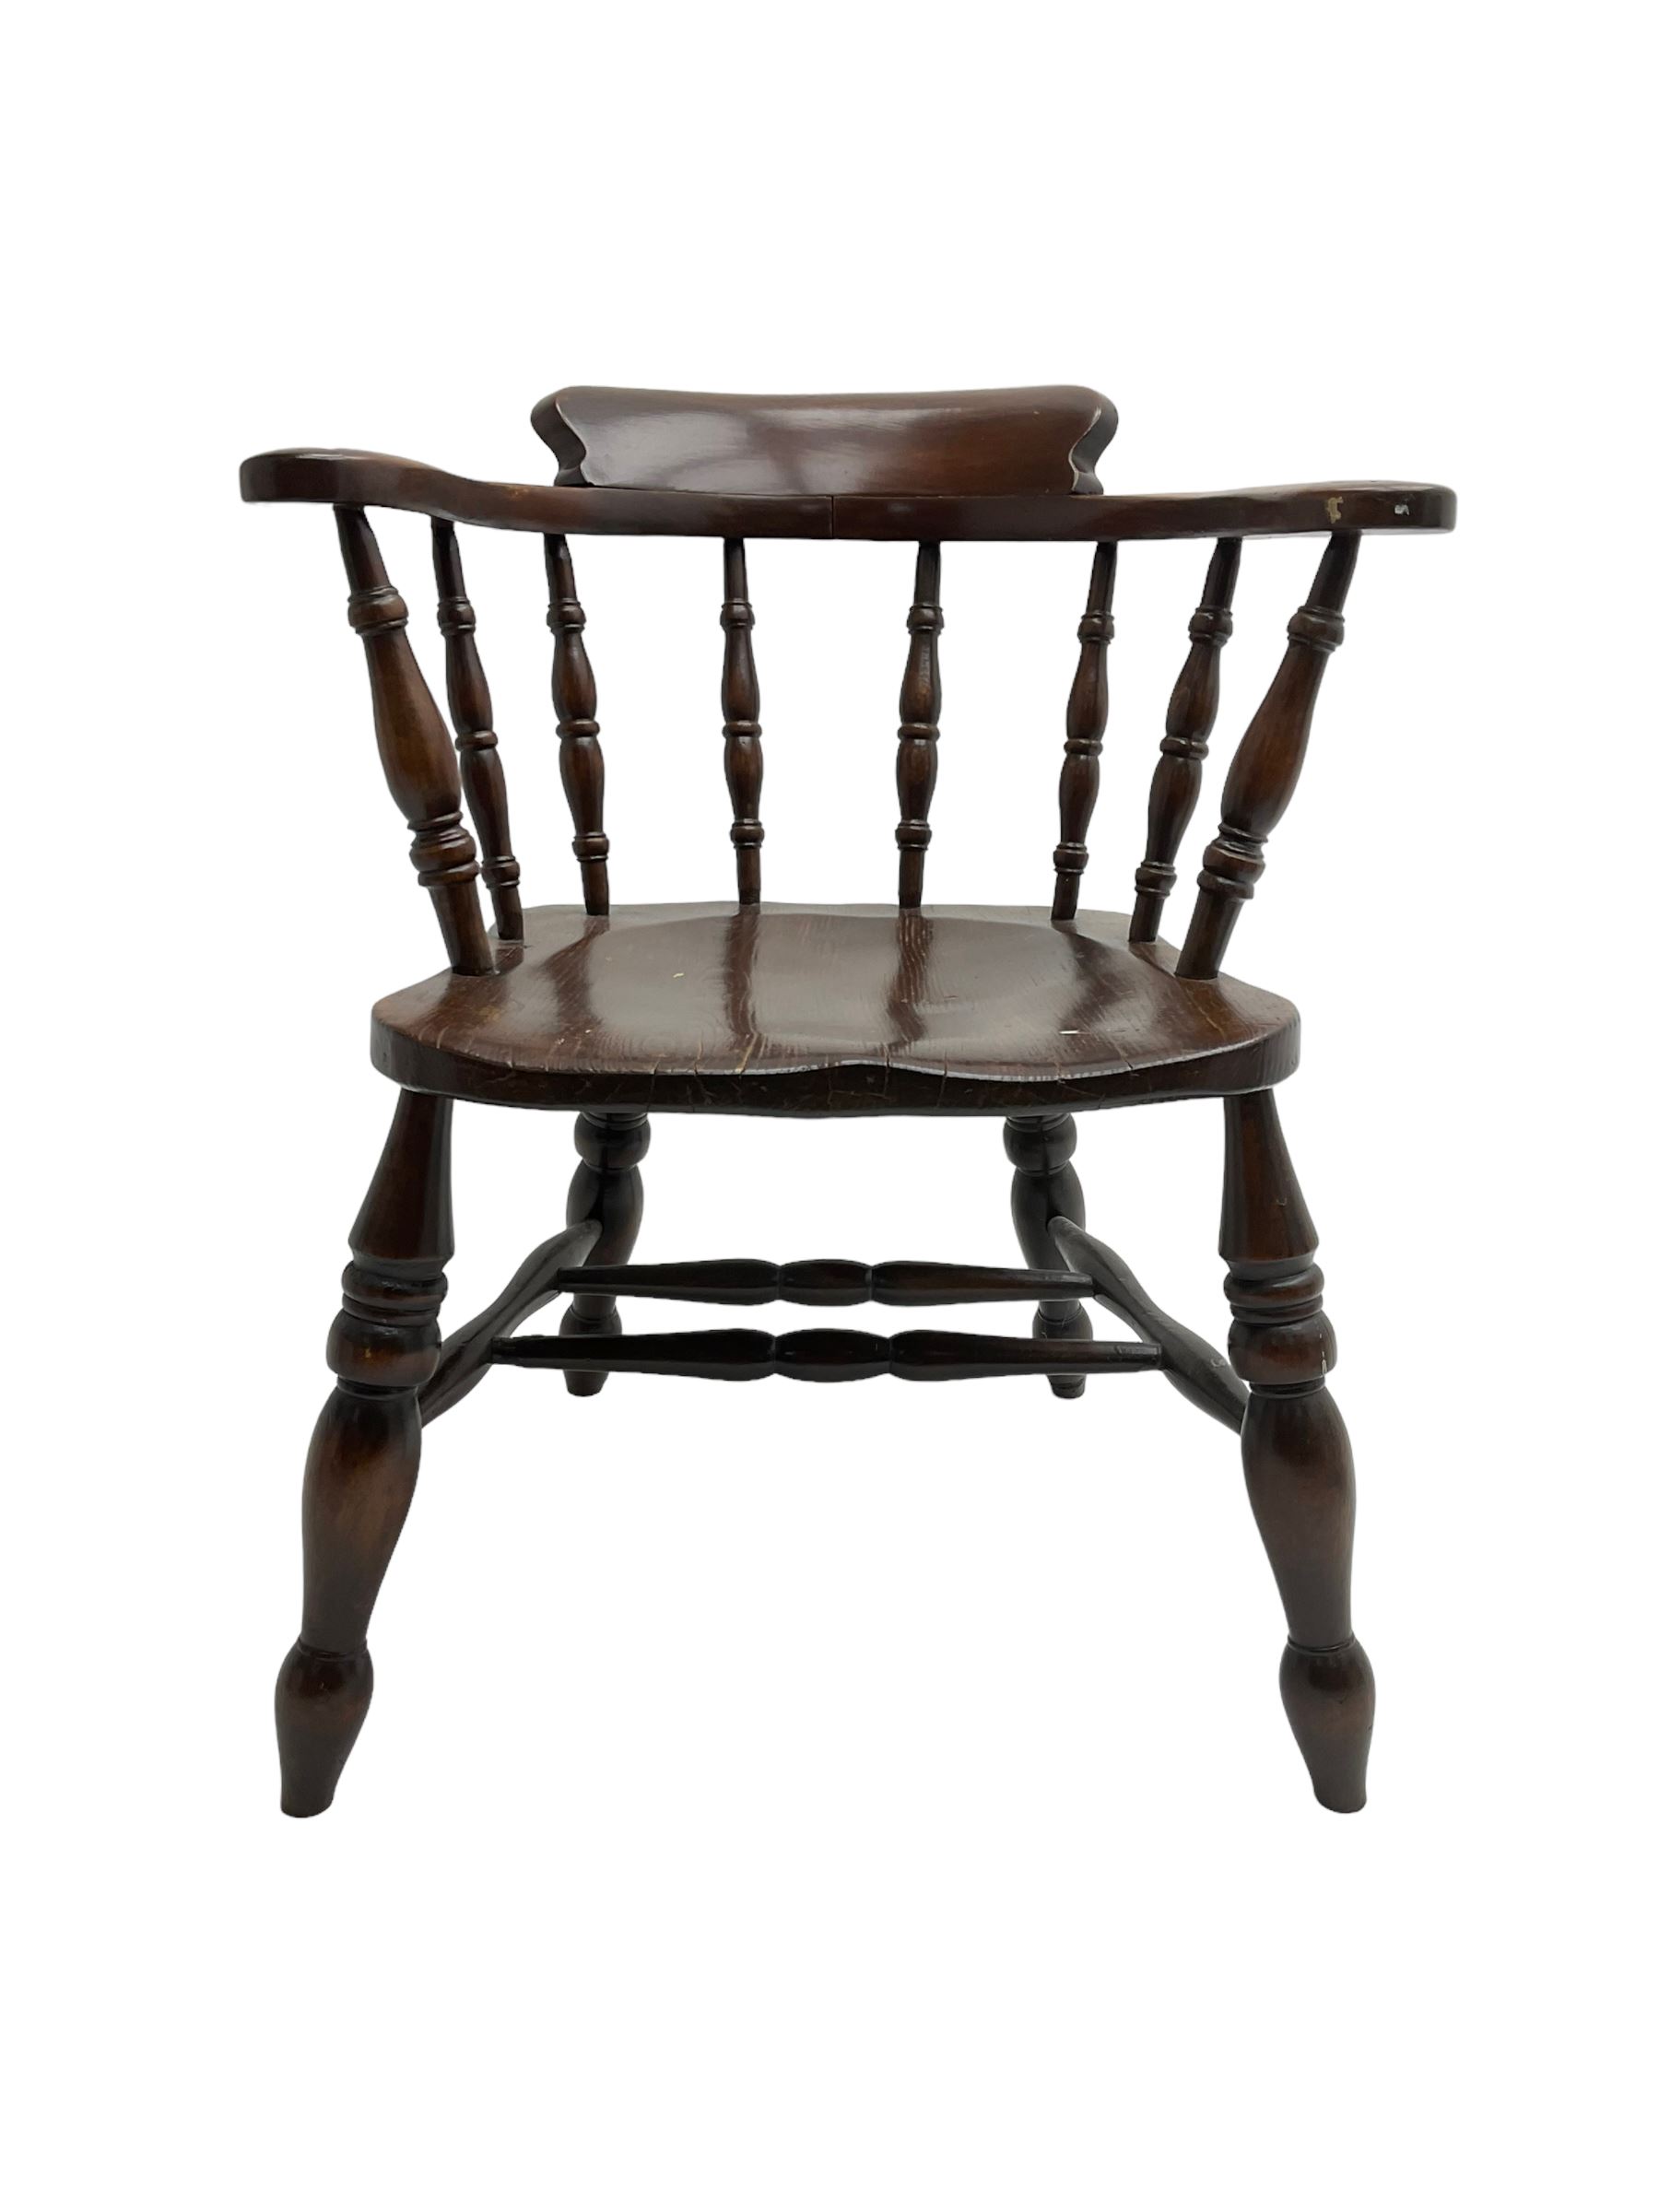 20th century elm and beech Captain's elbow chair